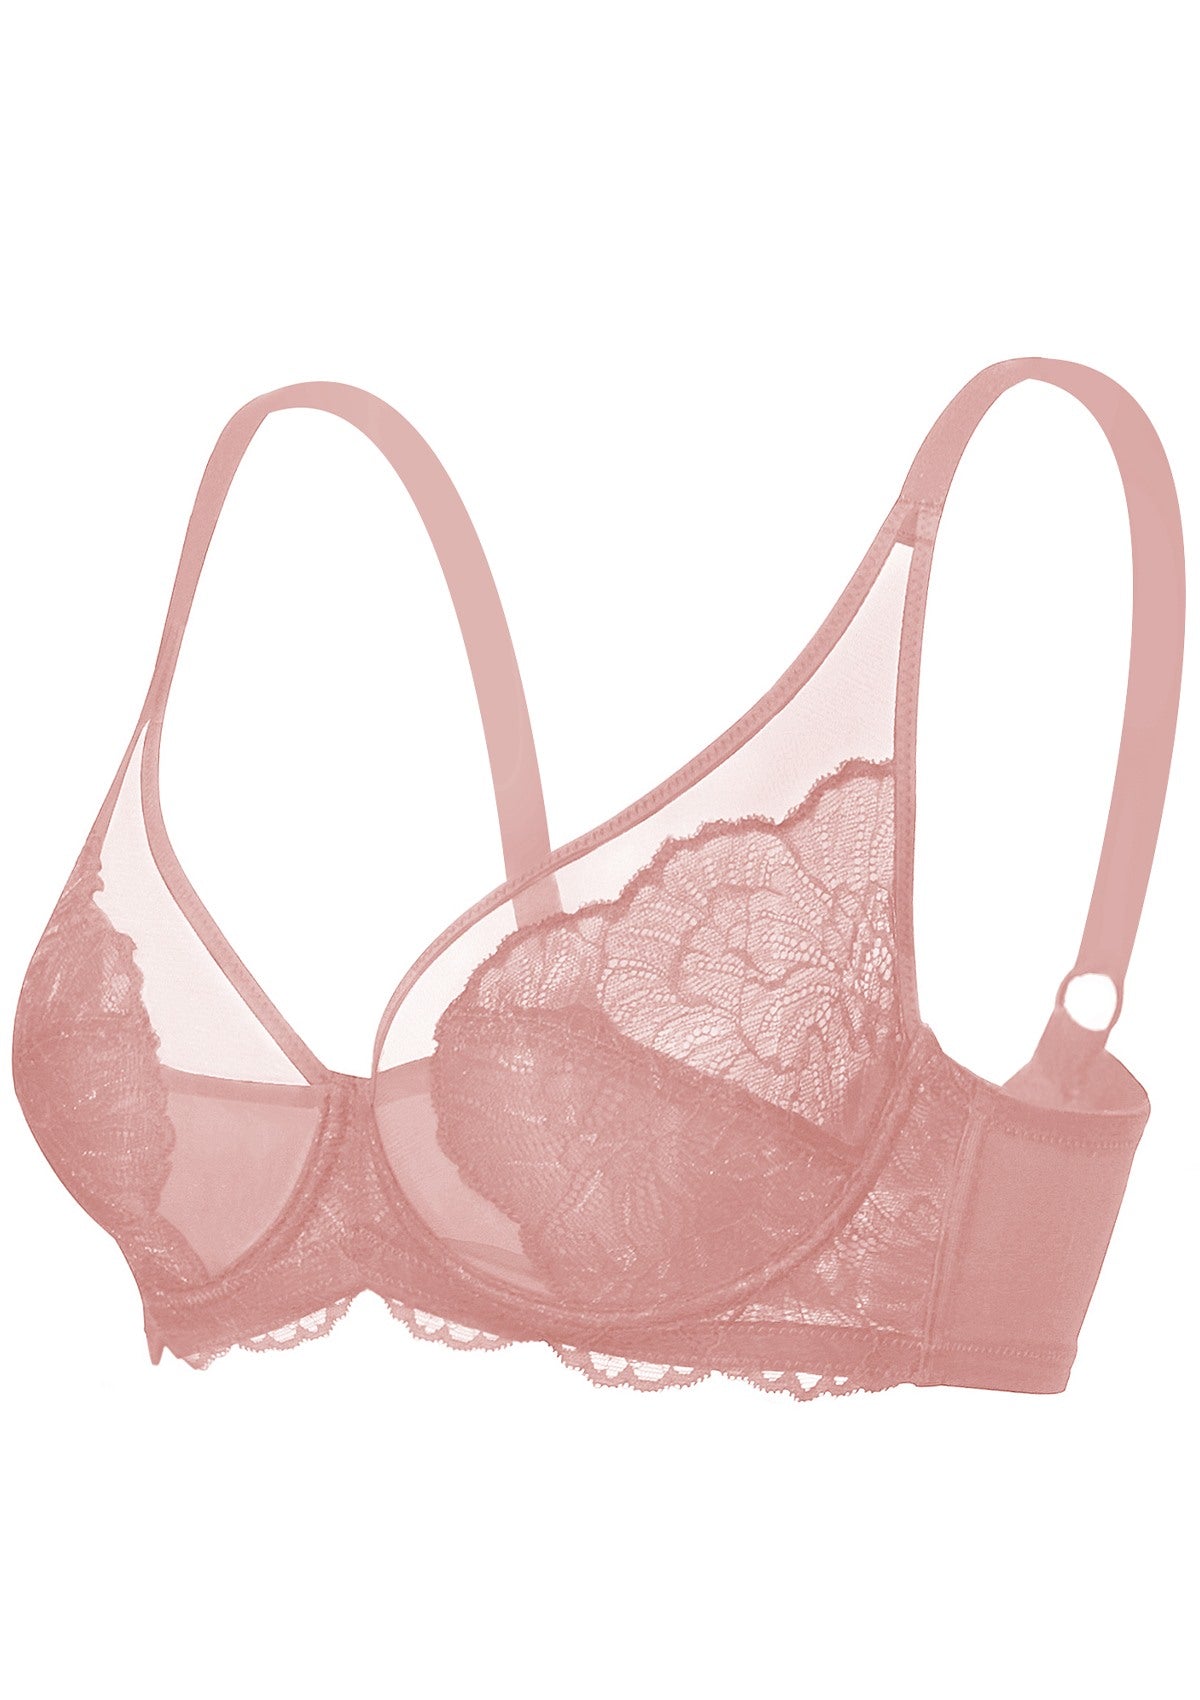 HSIA Blossom Unlined Lace Underwire Bra - Light Coral / 40 / D